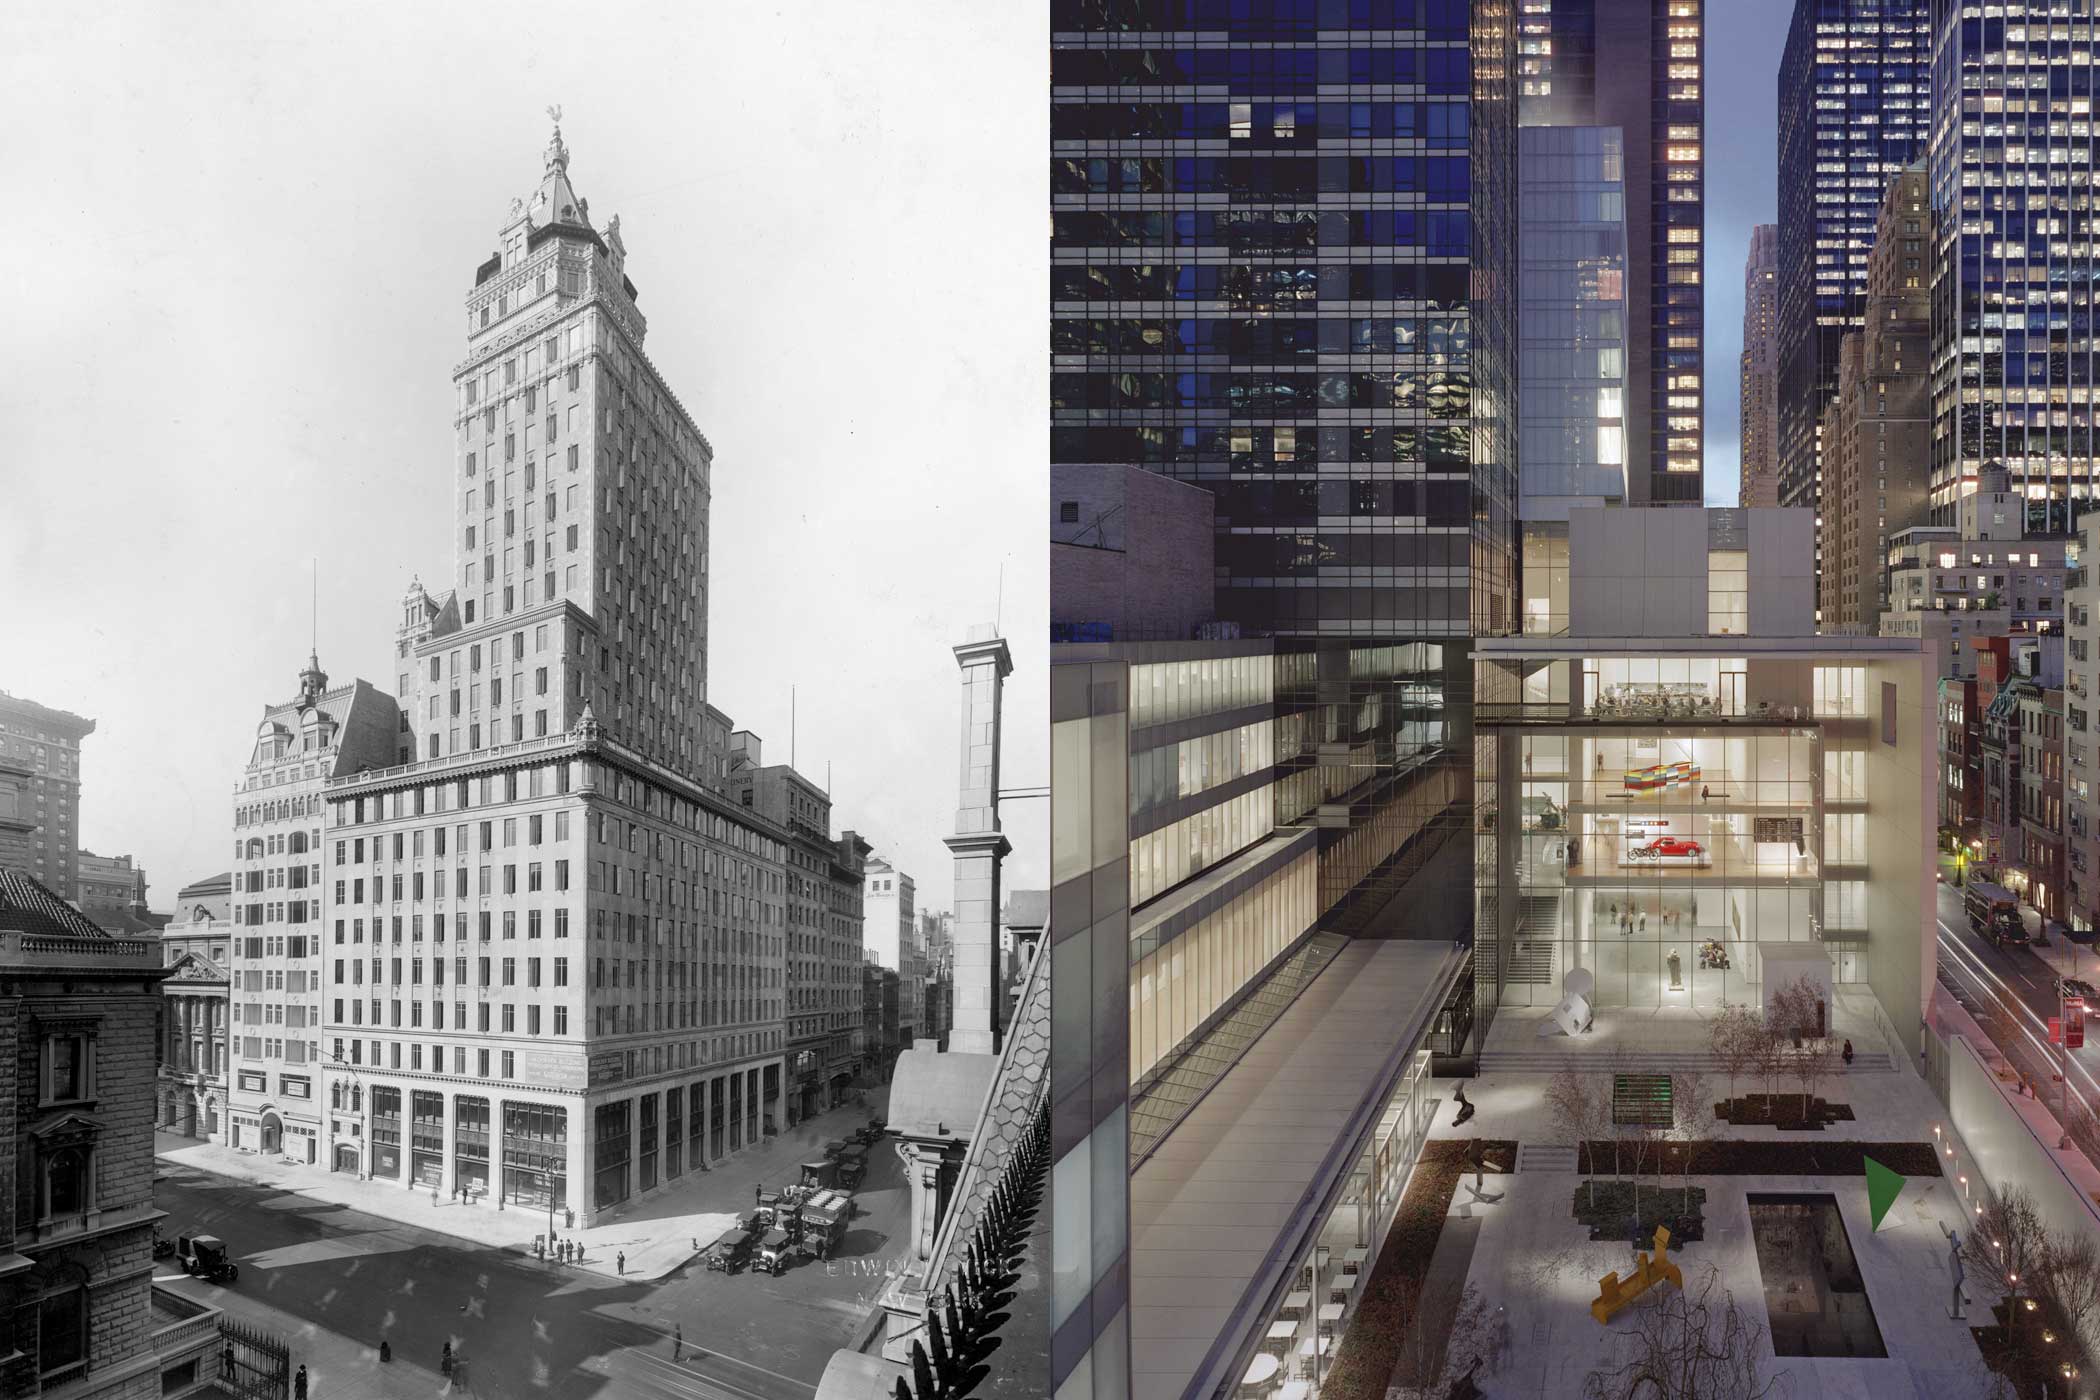 Left: The Heckscher building circa 1925; Right: The current day Museum of Modern Art and its outdoor sculpture garden. (Edwin Levick—Hulton Archive/Getty Images; Timothy Hursley—The Museum of Modern Art/AP)